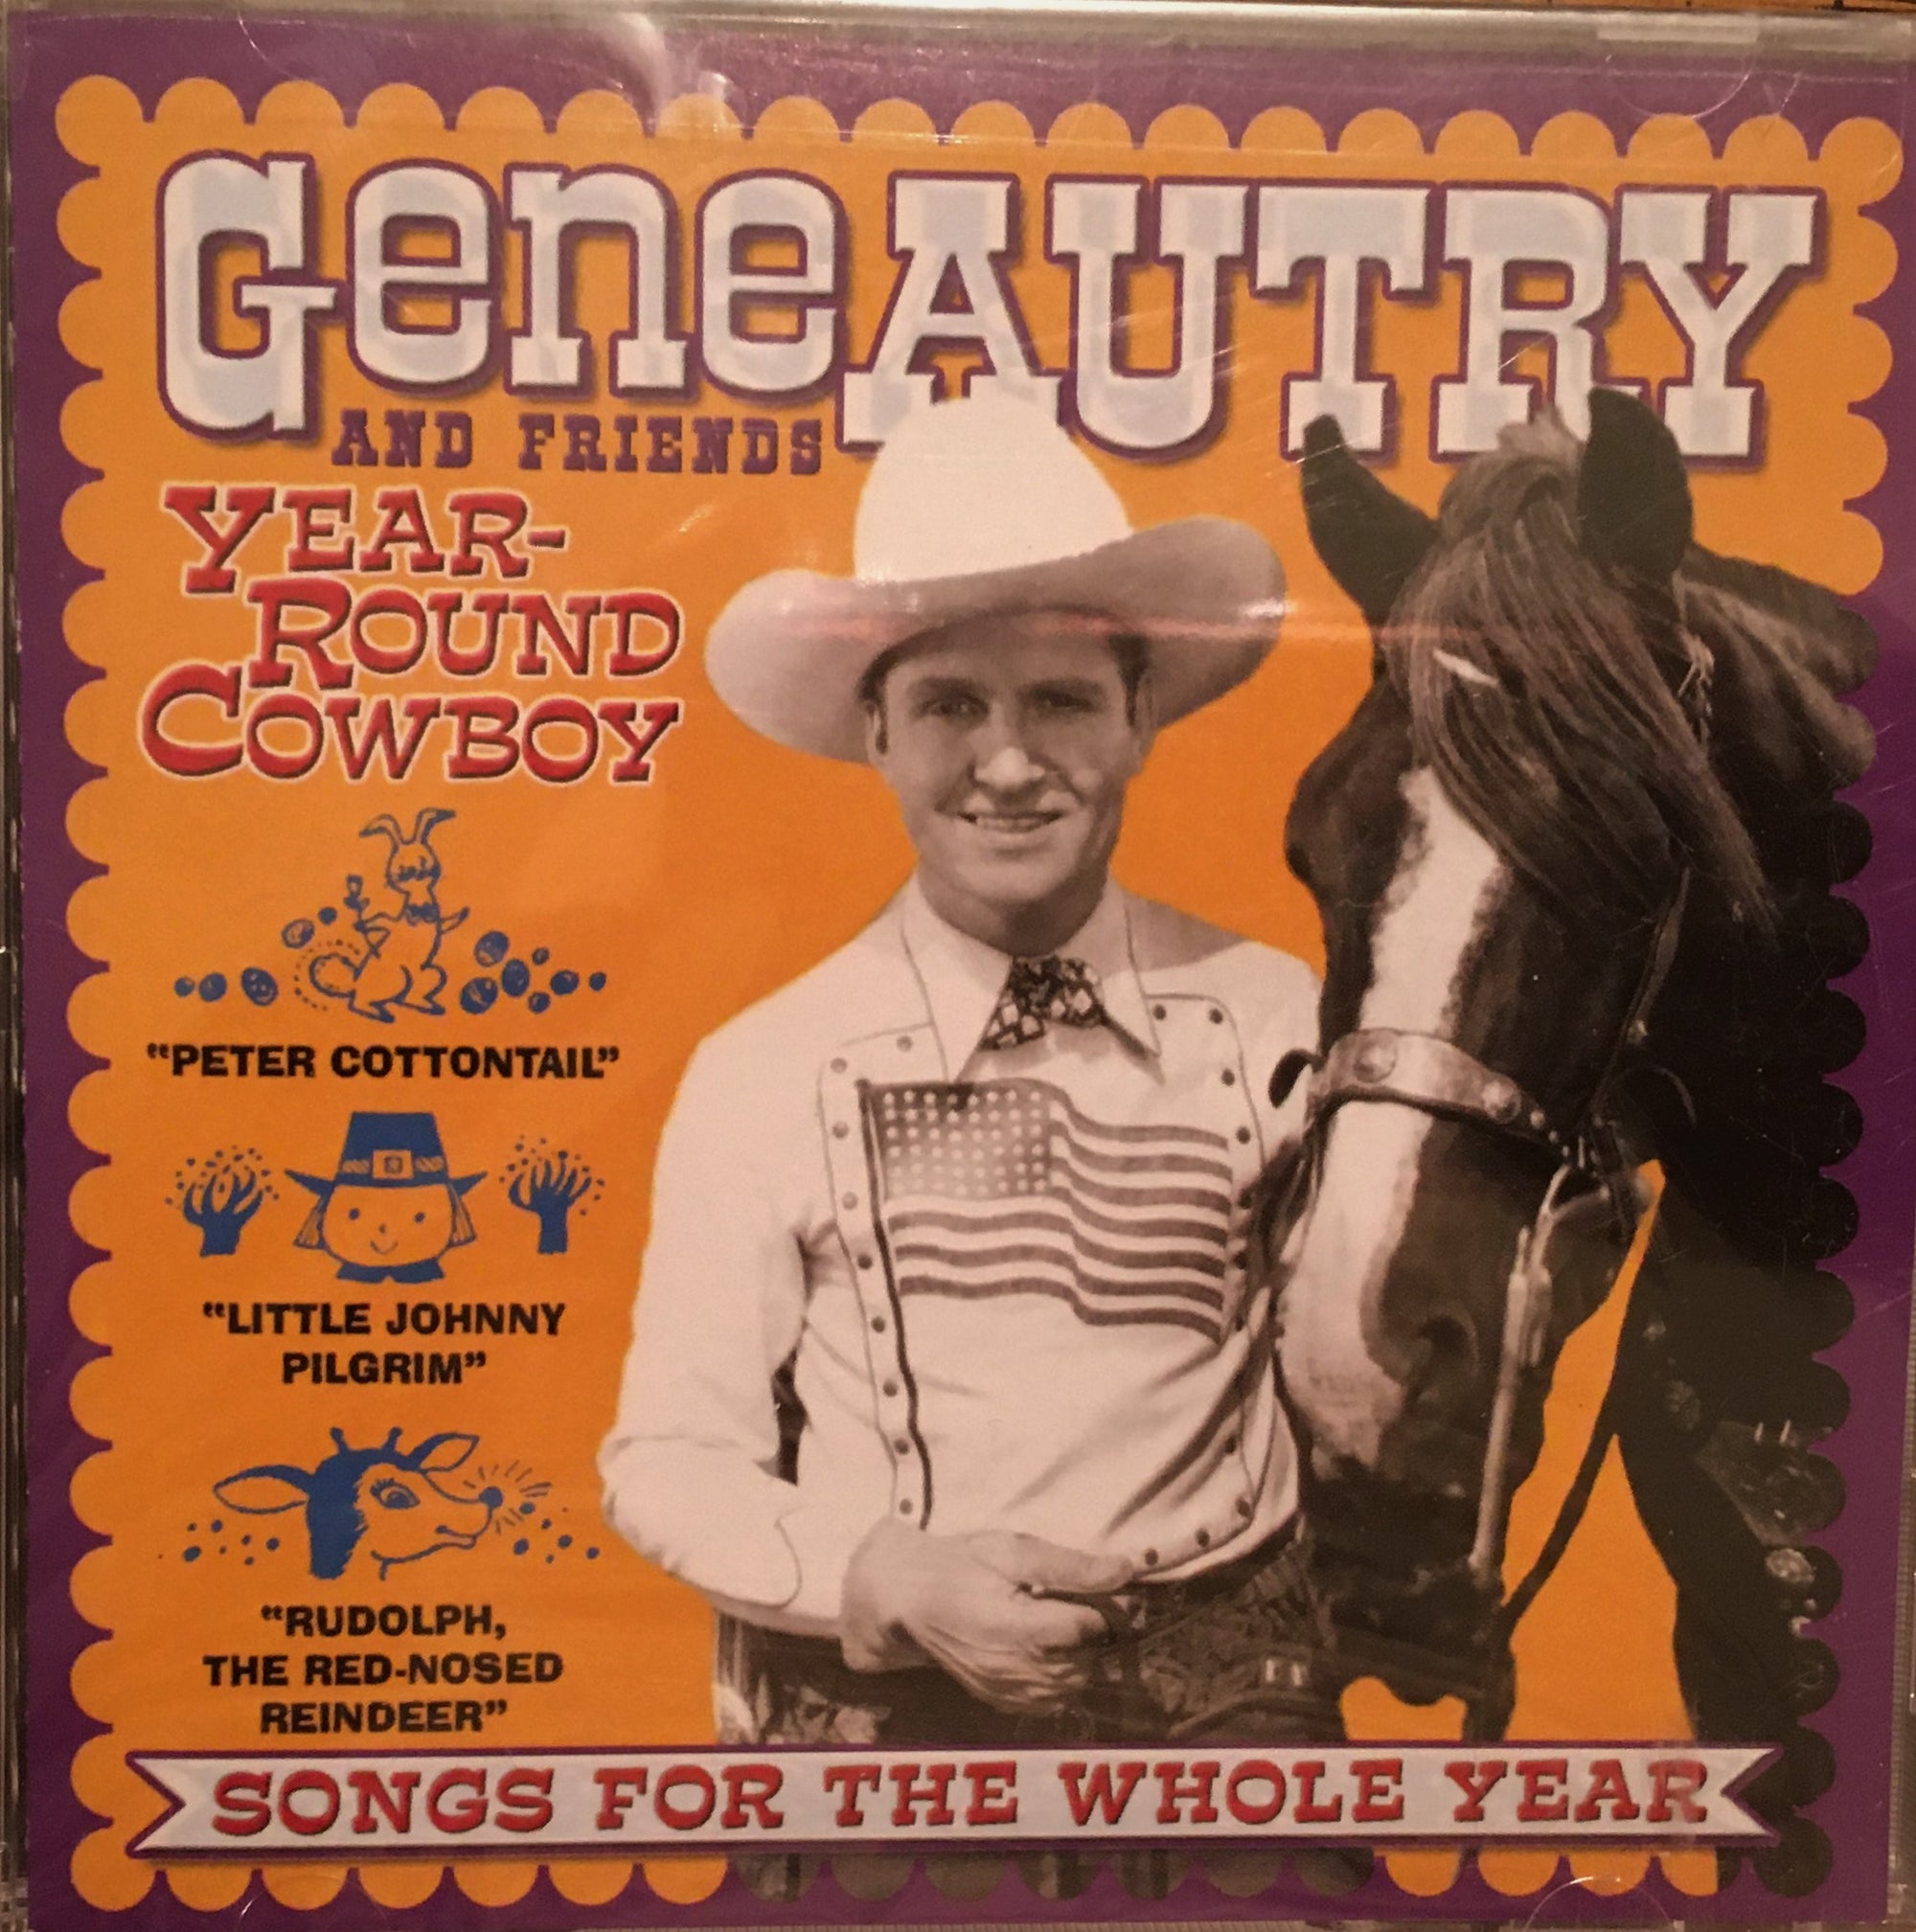 CD Year Around Cowboy by Gene Autry and Friends